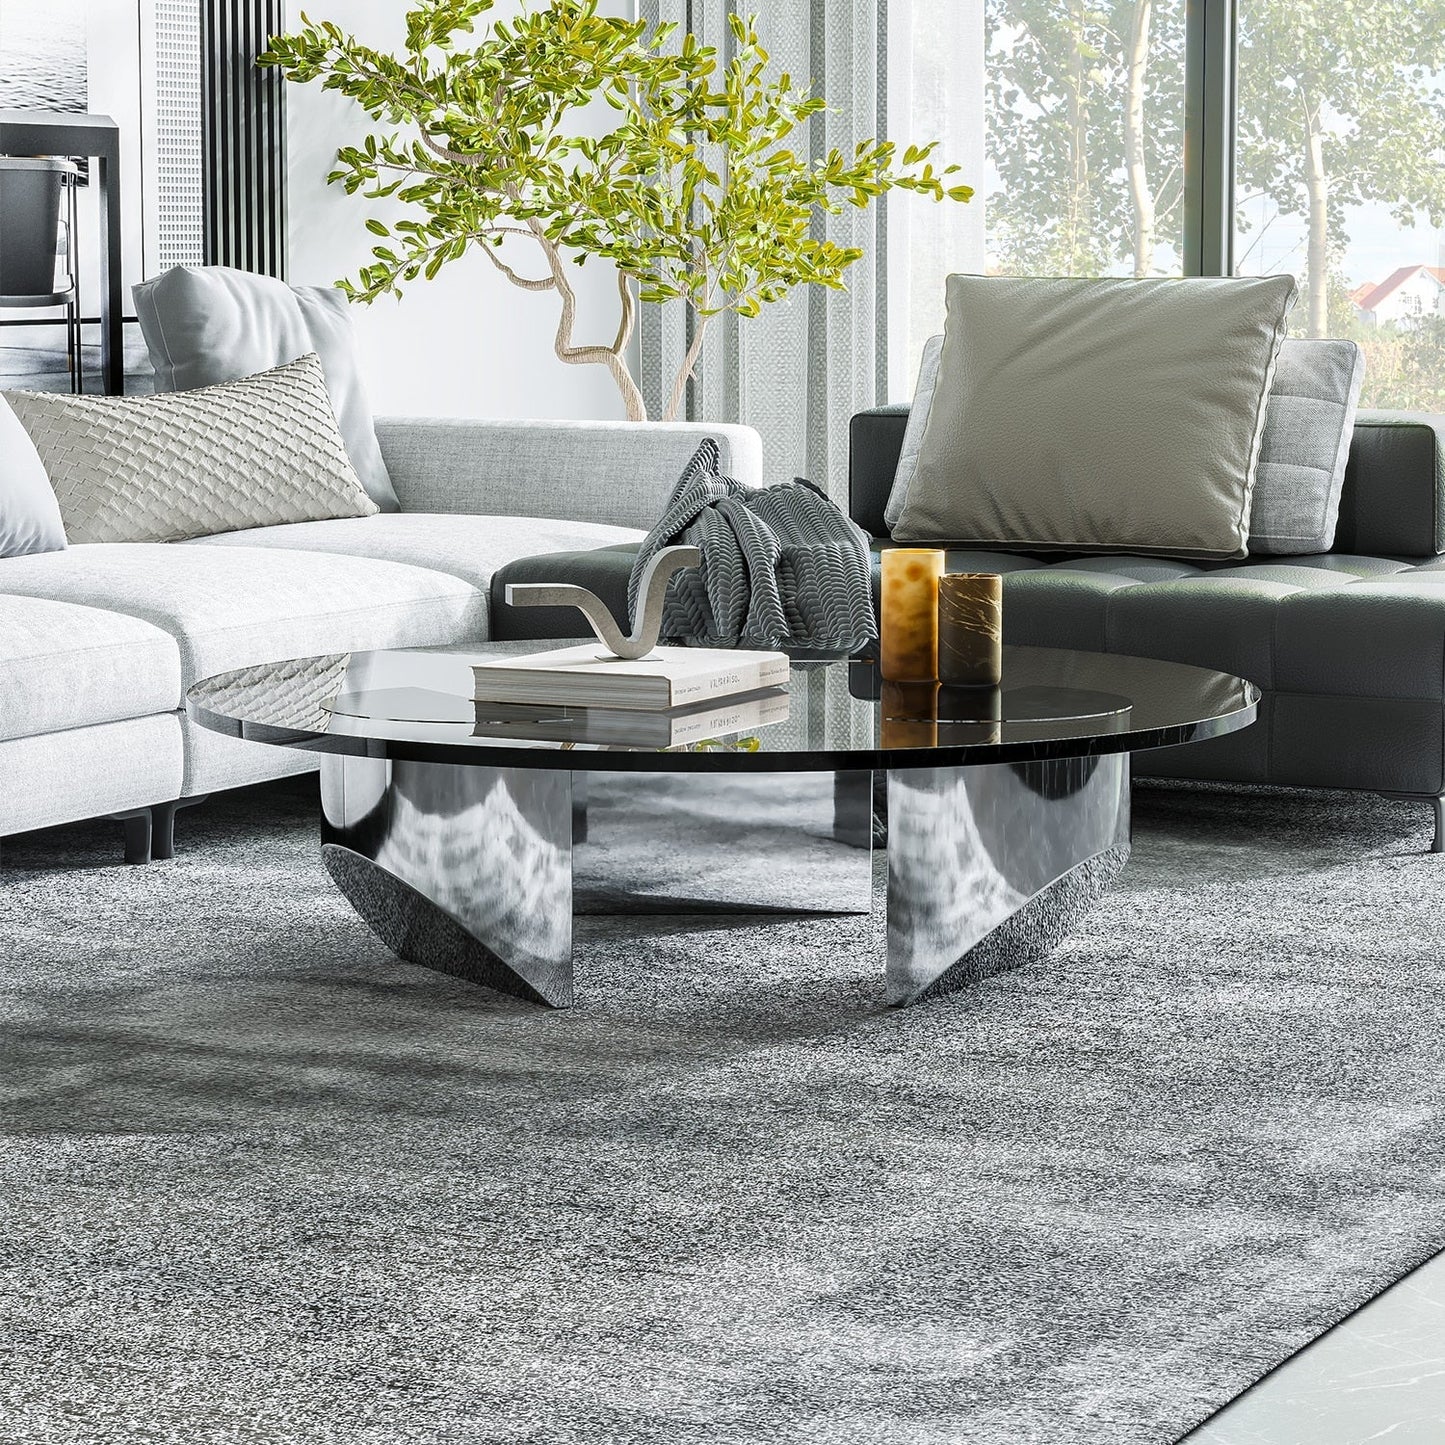 CORX Designs - Minotti Wedge Coffee Table - Review